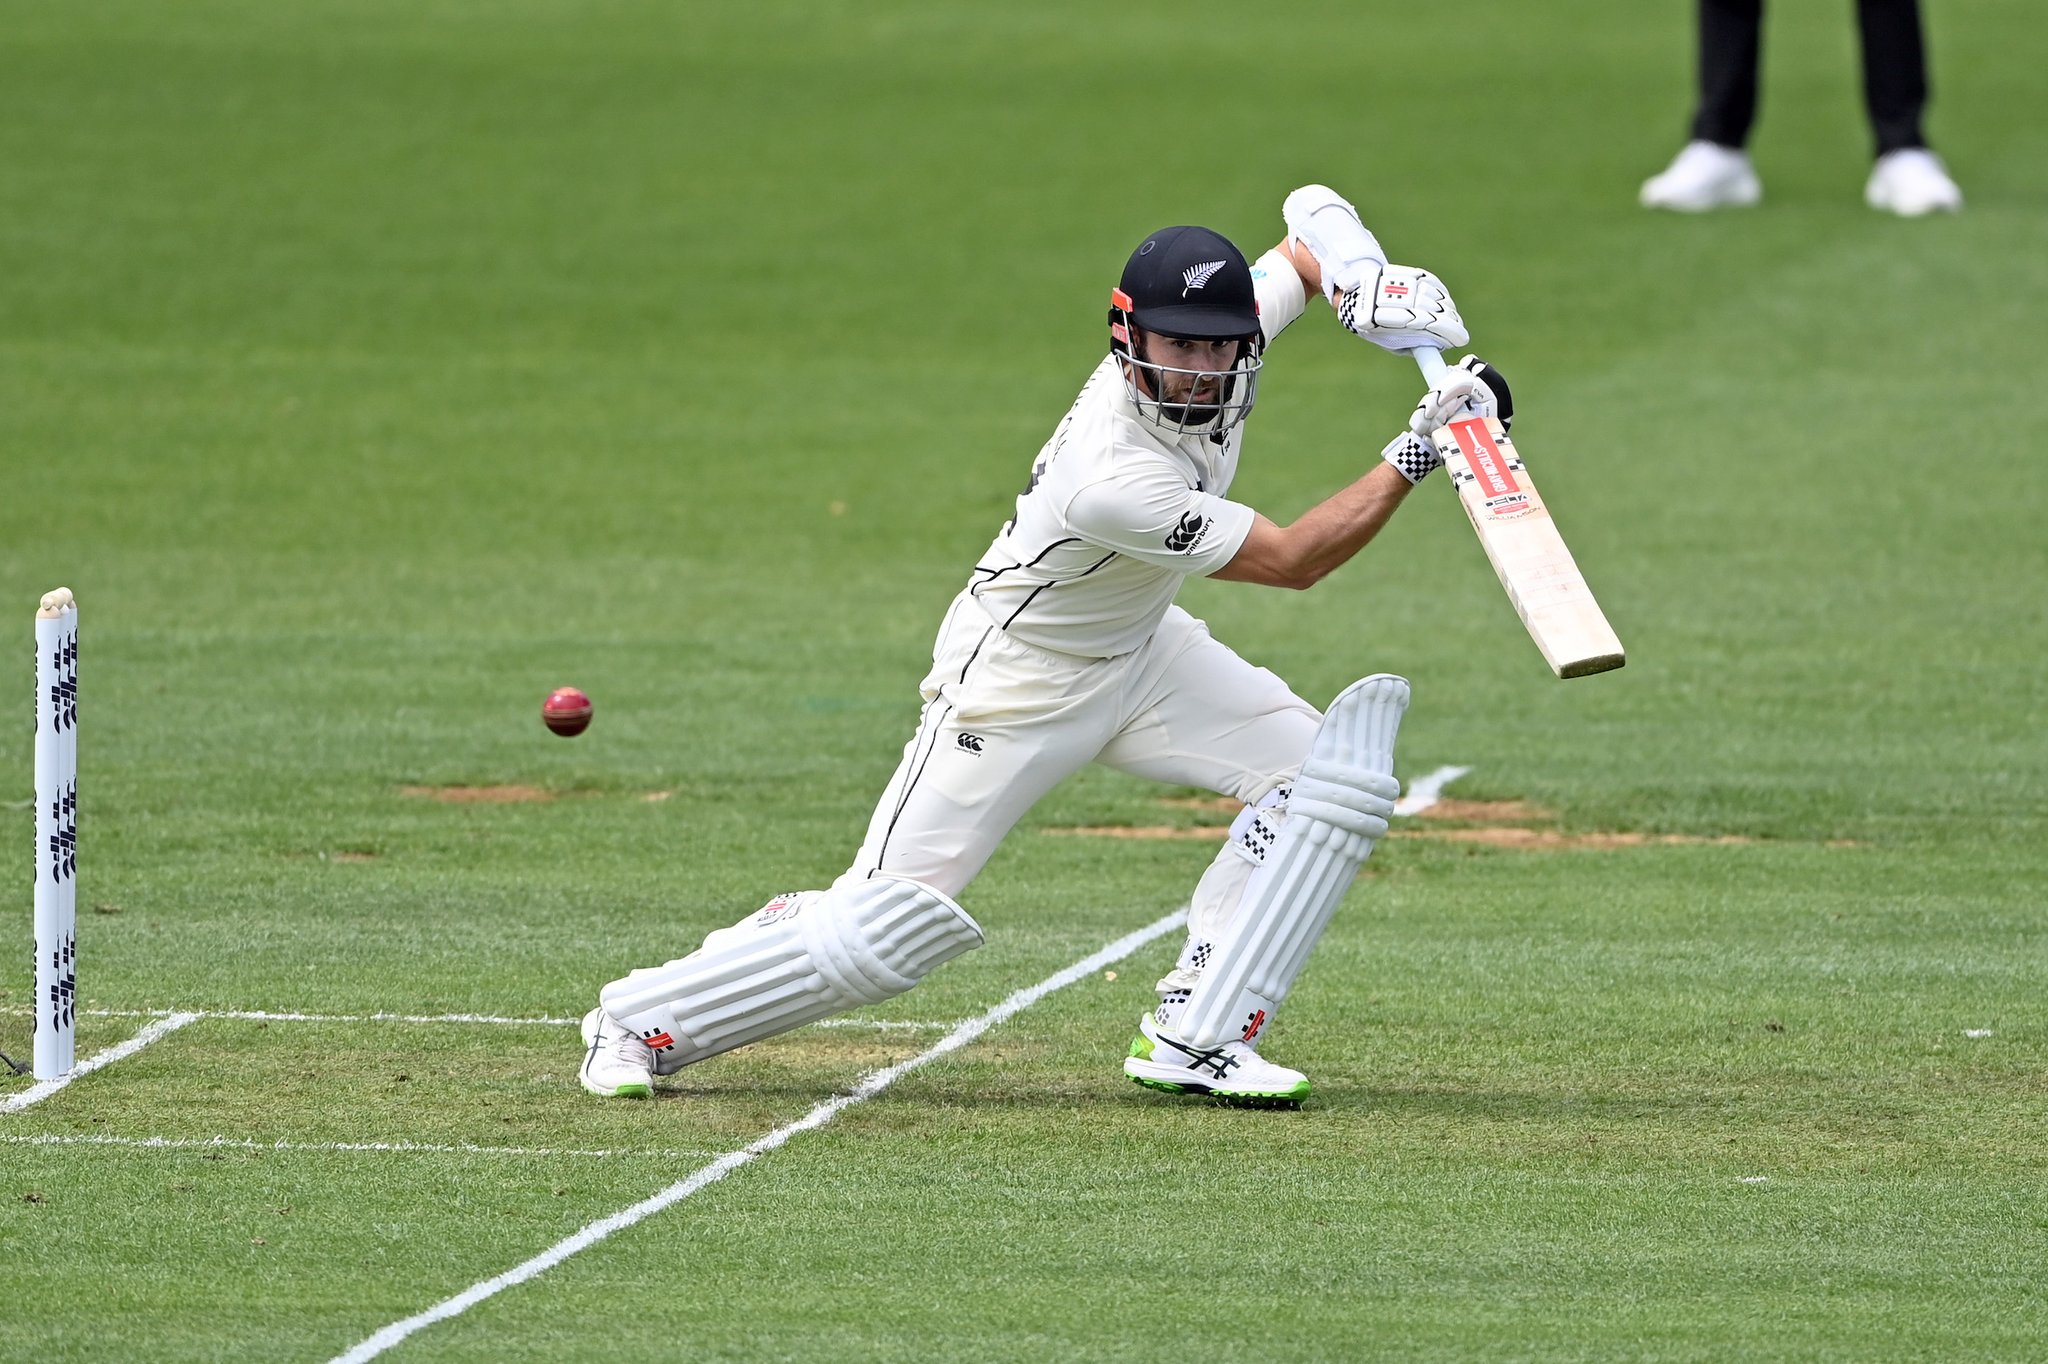 New Zealand beat West Indies by an innings and 134 runs in first Test